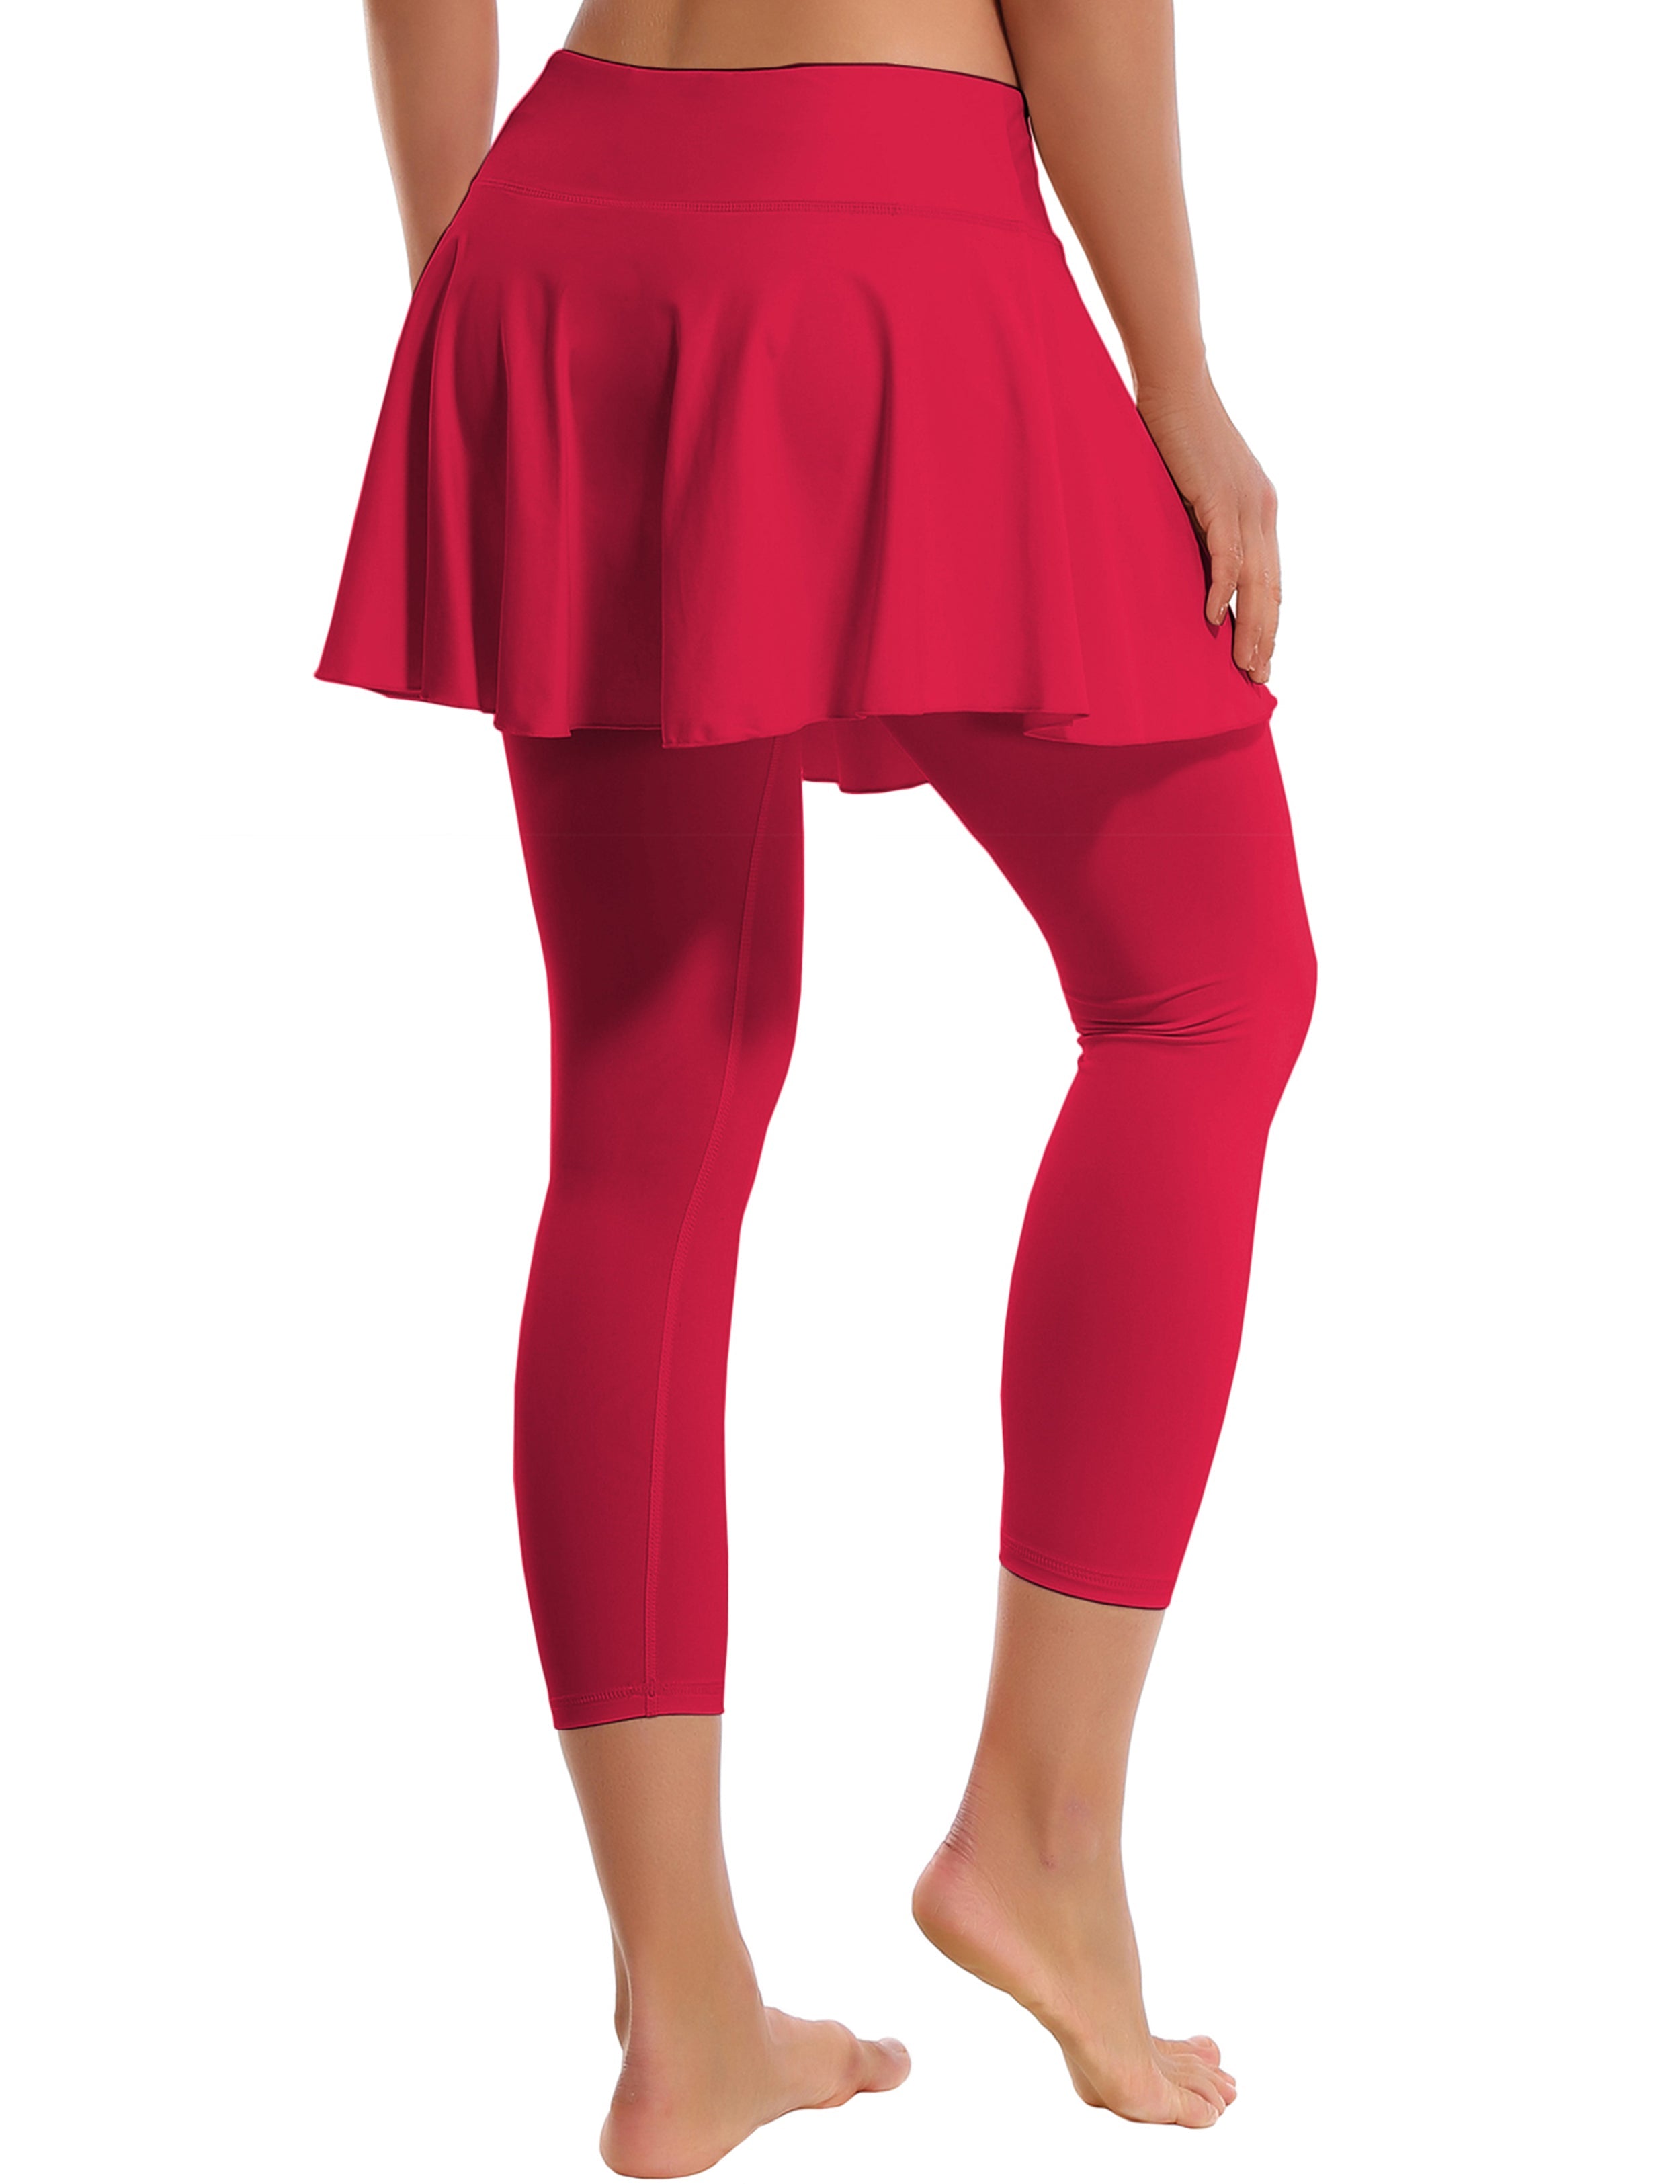 19" Capris Tennis Golf Skirted Leggings with Pockets rosecoral 80%Nylon/20%Spandex UPF 50+ sun protection Elastic closure Lightweight, Wrinkle Moisture wicking Quick drying Secure & comfortable two layer Hidden pocket